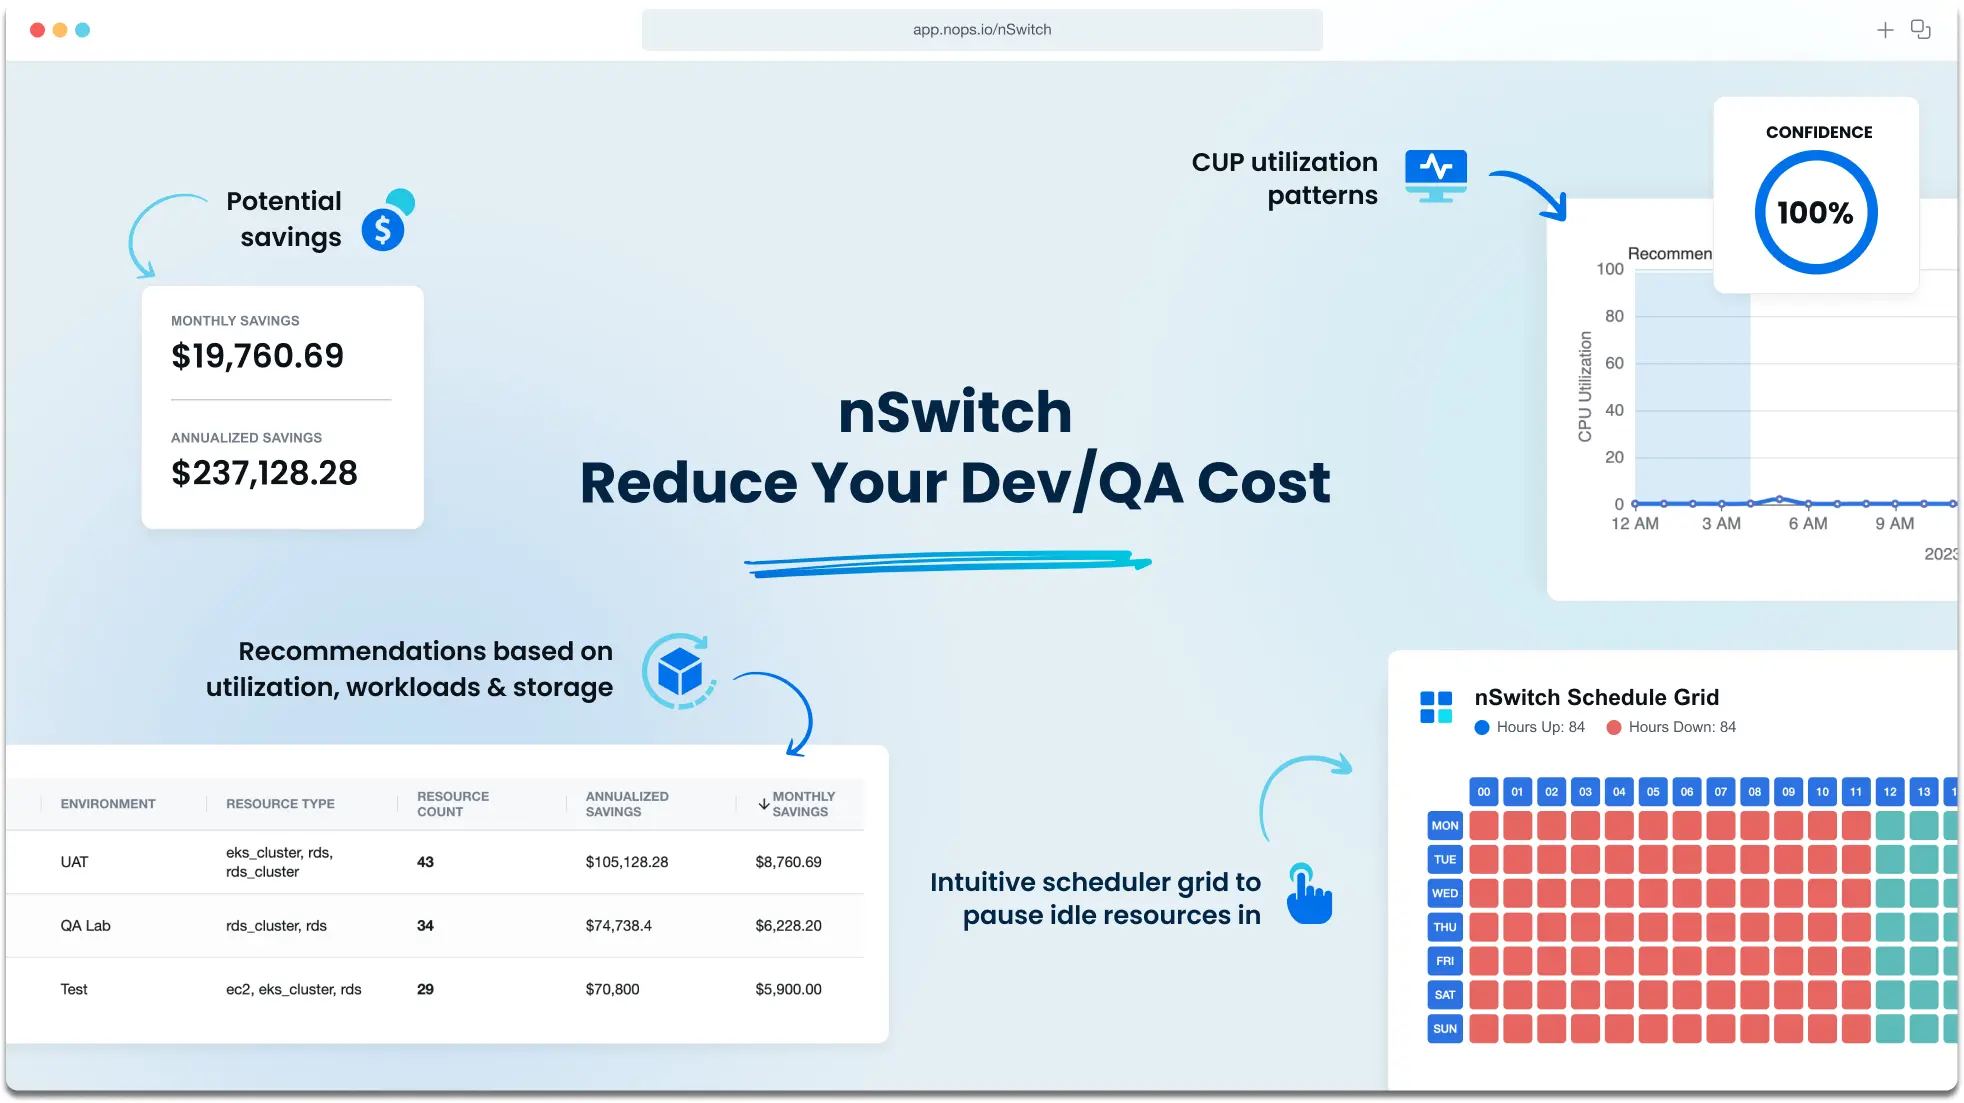 nSwitch Reduce Your Dev/QA Cost